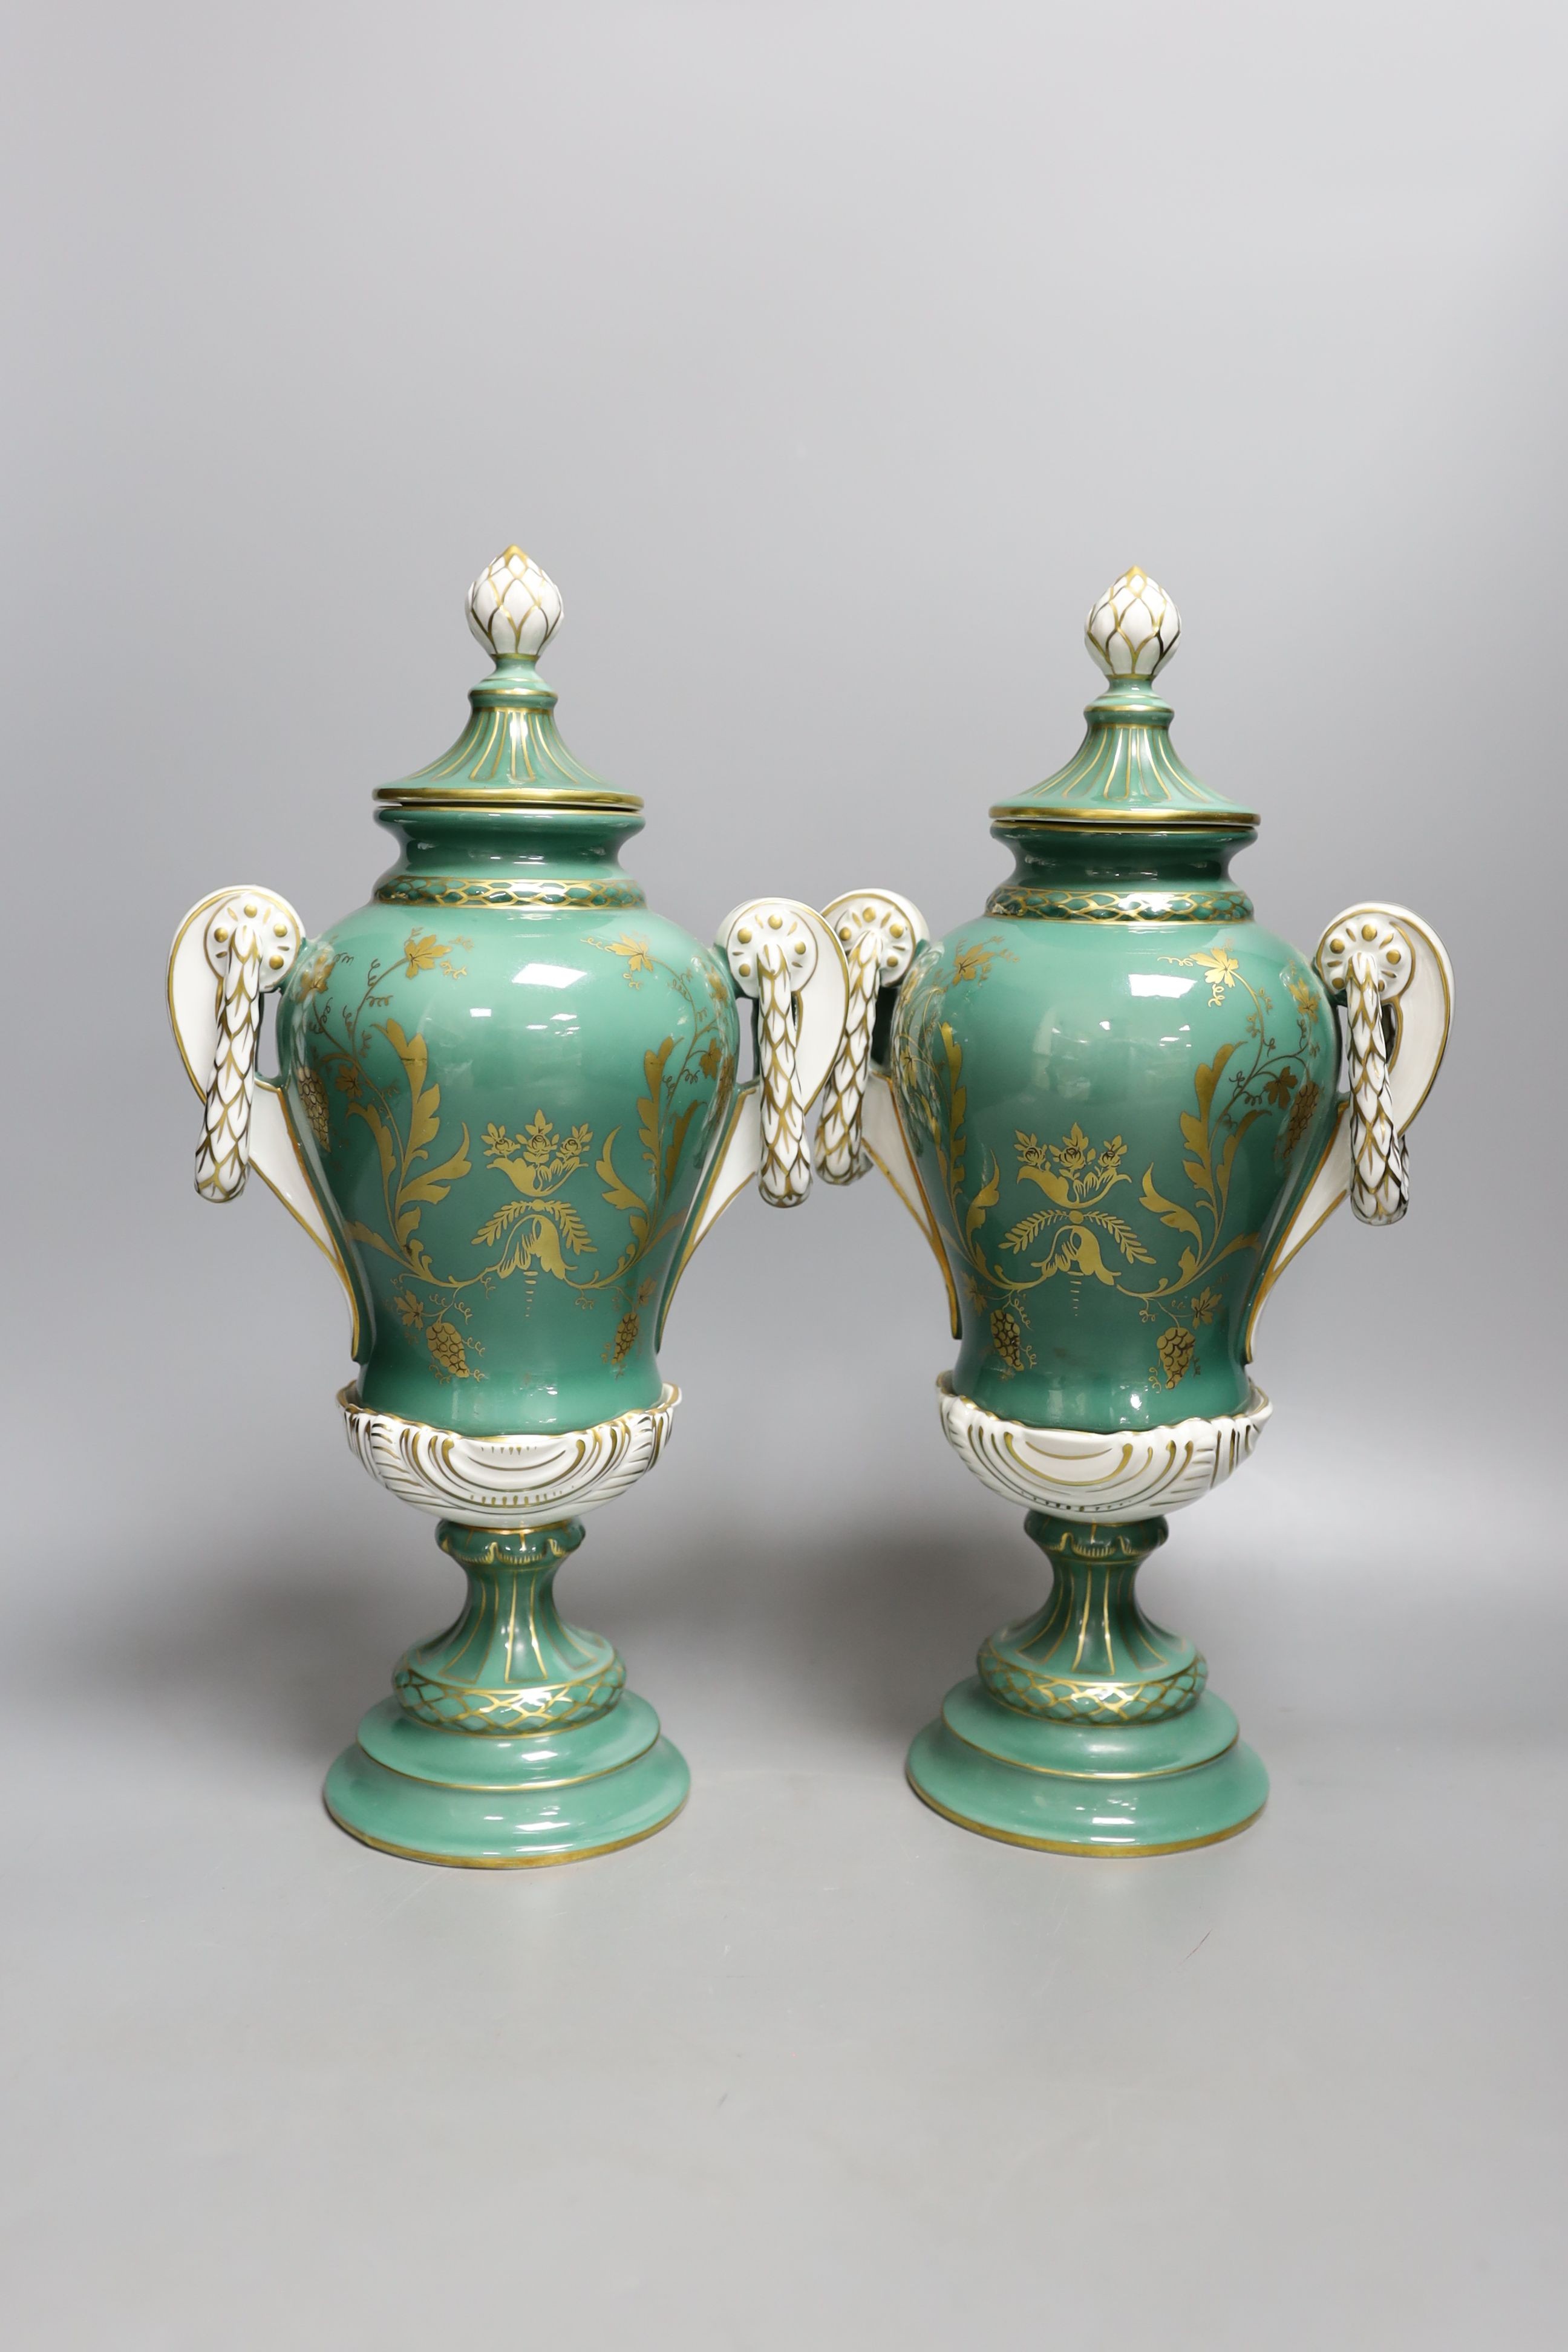 A pair of early 20th century Dresden vases painted with landscapes on an avocado green ground, 24cm high together with a German bottle vase and cover painted with four landscape panels separated by blue and white panels